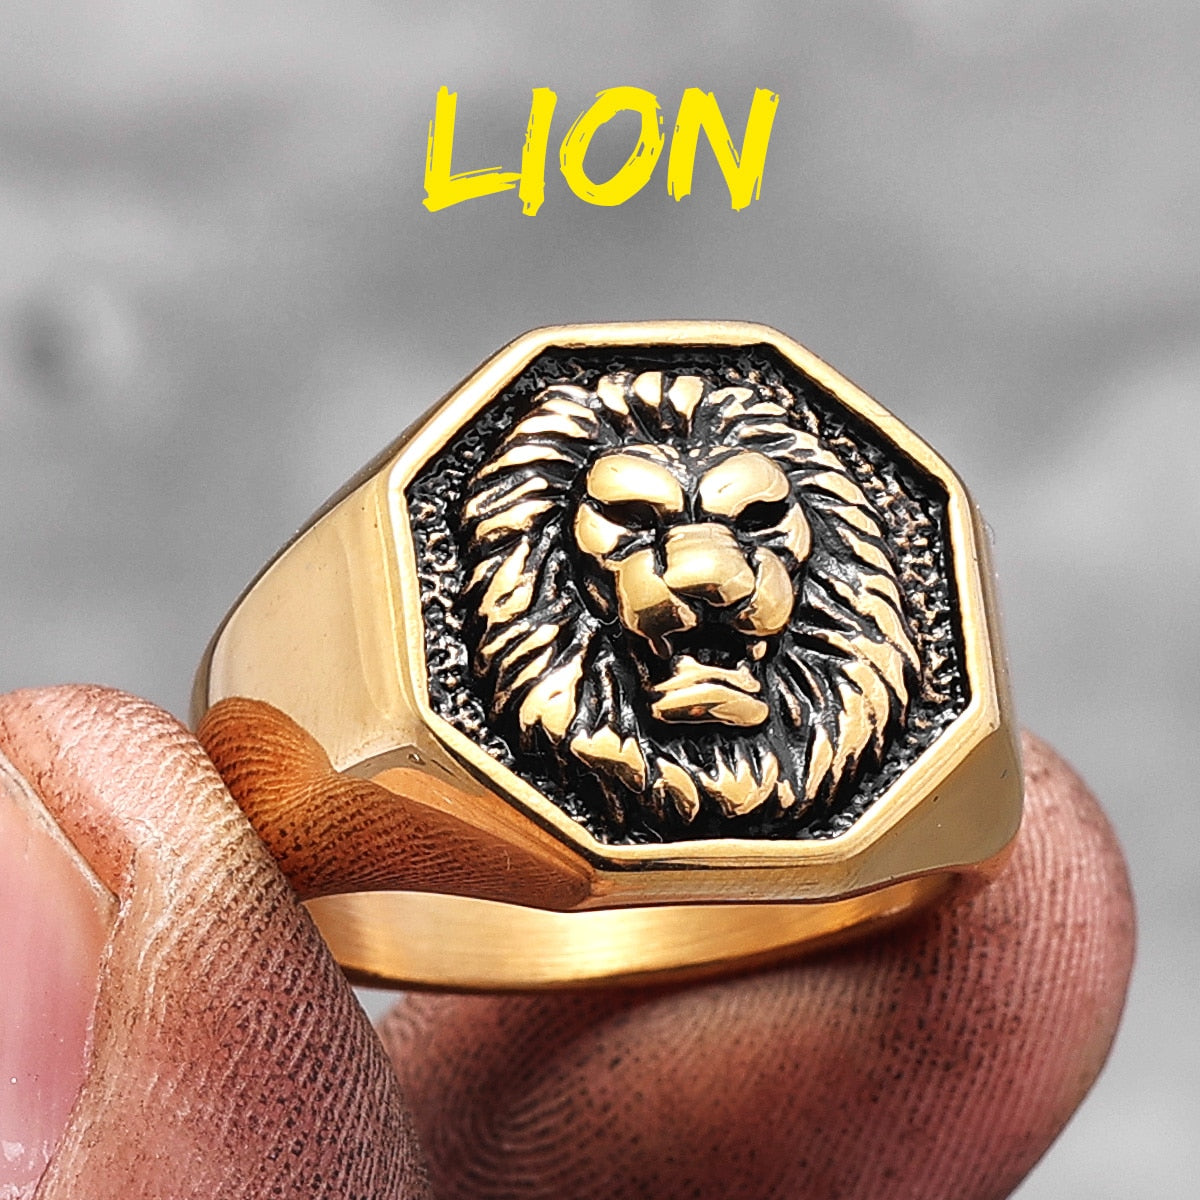 Lion King Animal Stainless Steel Mens Women's Rings Punk Trendy Unique for Couple Male Biker Jewelry Creativity Gift R760-Lion-Gold